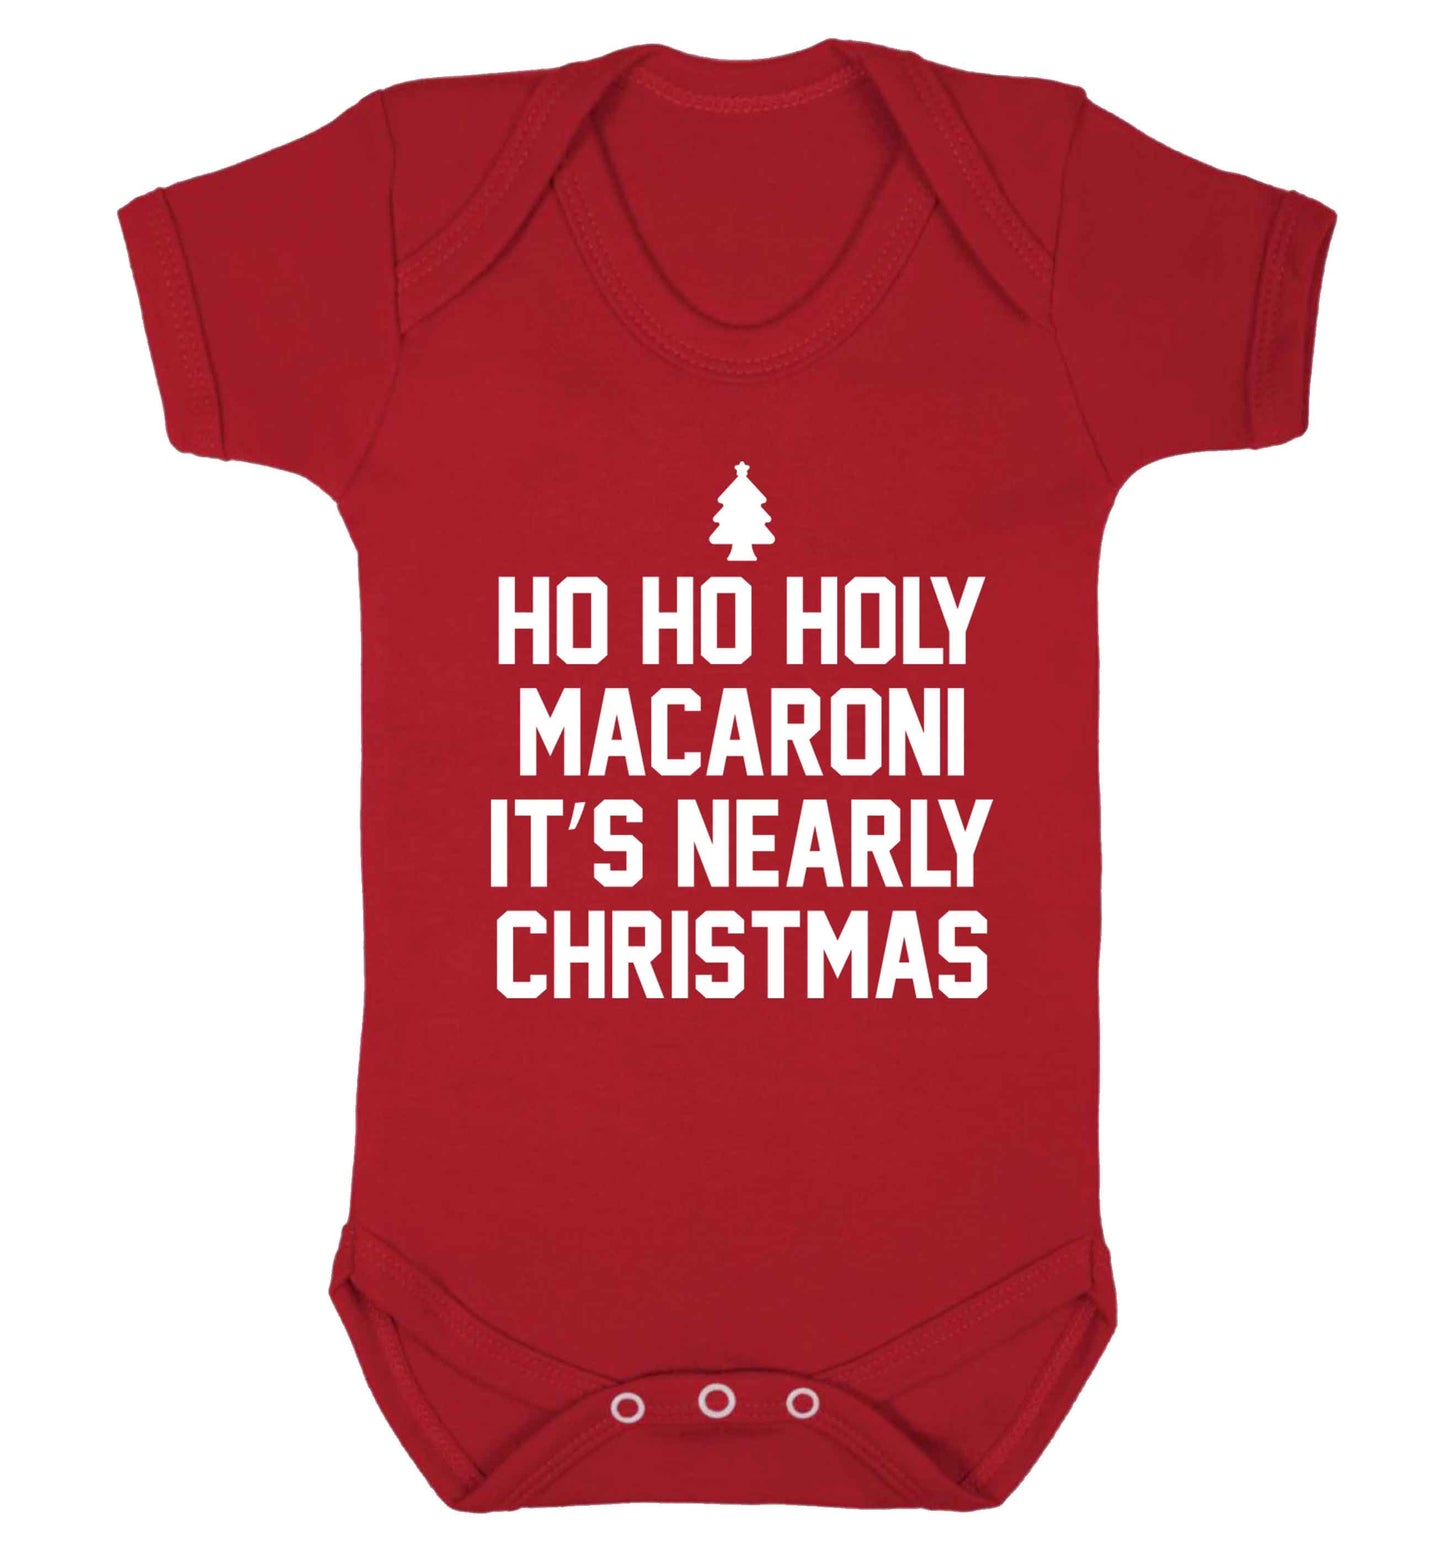 Ho ho holy macaroni it's nearly Christmas Baby Vest red 18-24 months